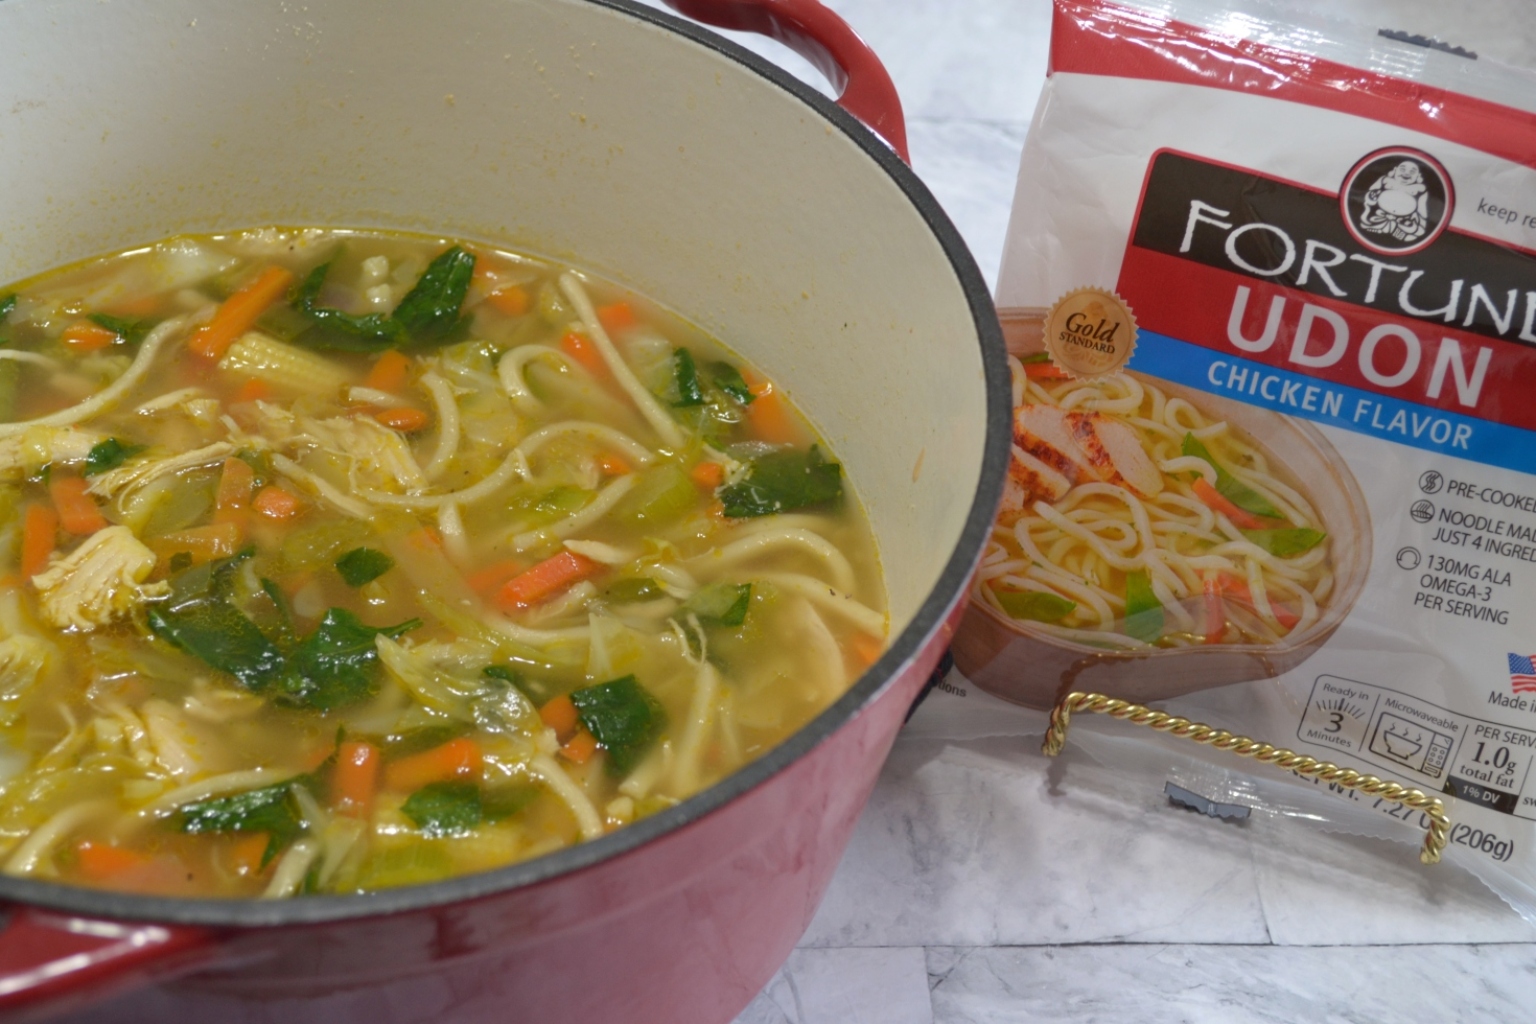 Oriental Chicken Udon Noodle Soup is a warm bowl of rich, seasoned broth, loaded with rotisserie chicken, asian style vegetables and delicious Fortune Chicken Flavored Udon Noodles